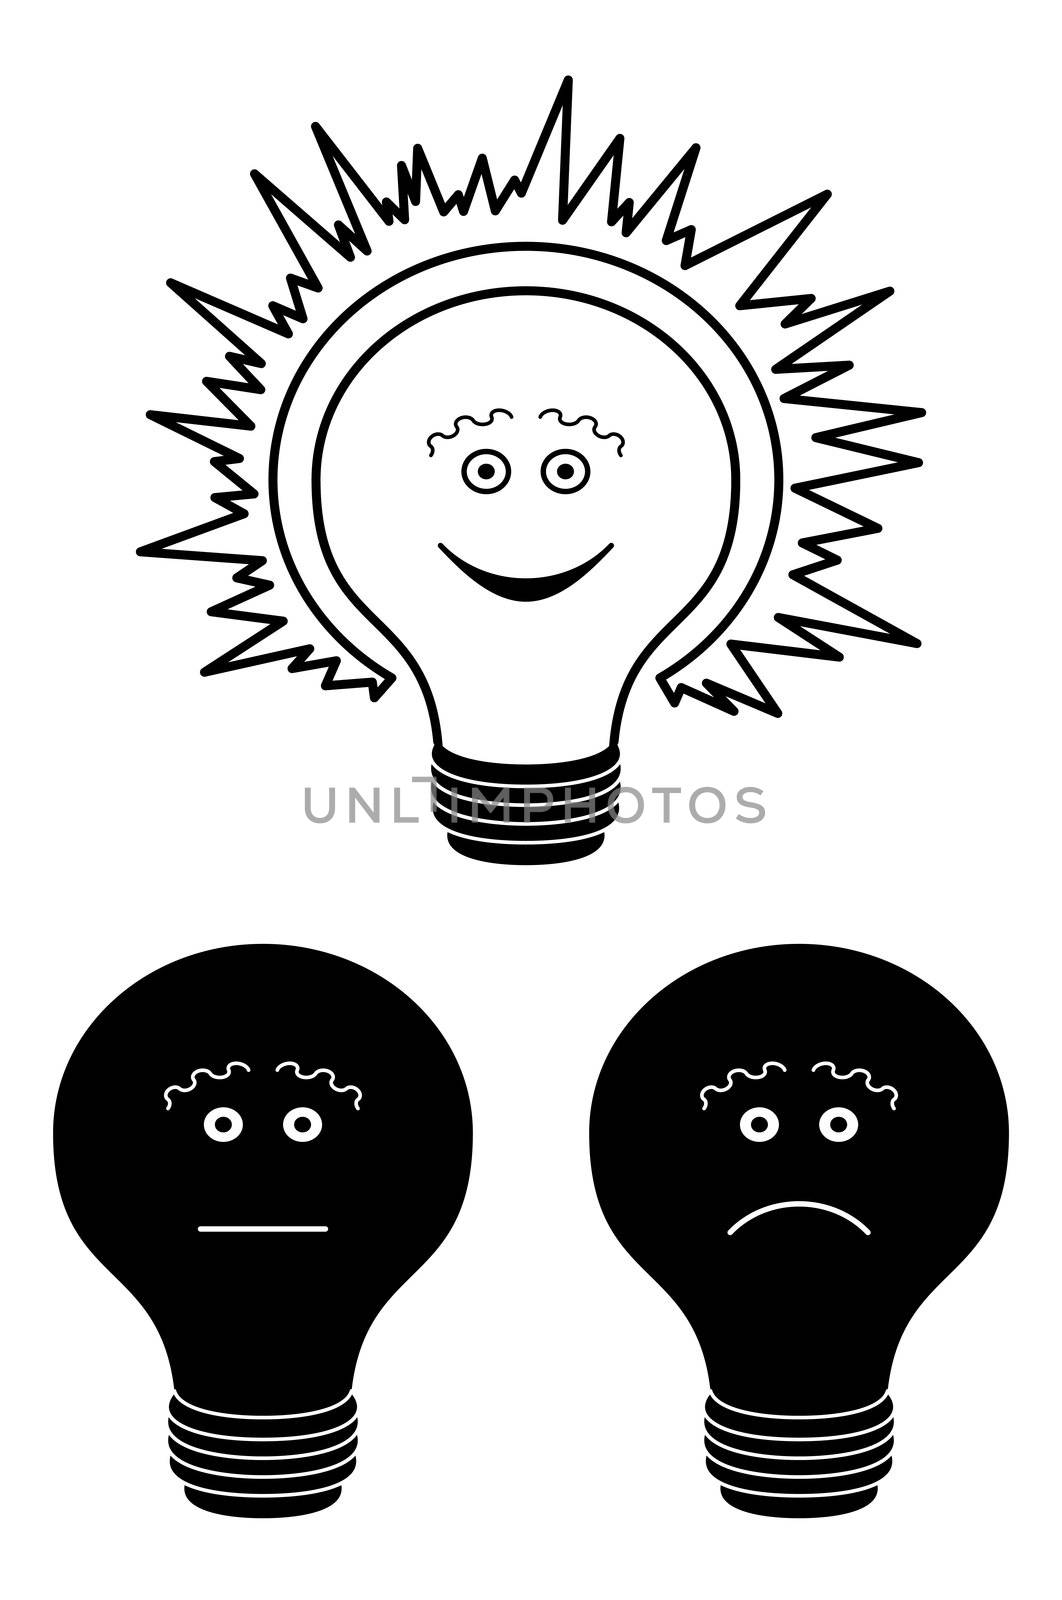 Set of smilies in the form of electric bulbs - sad, indifferent and cheerful, black contour on white background.